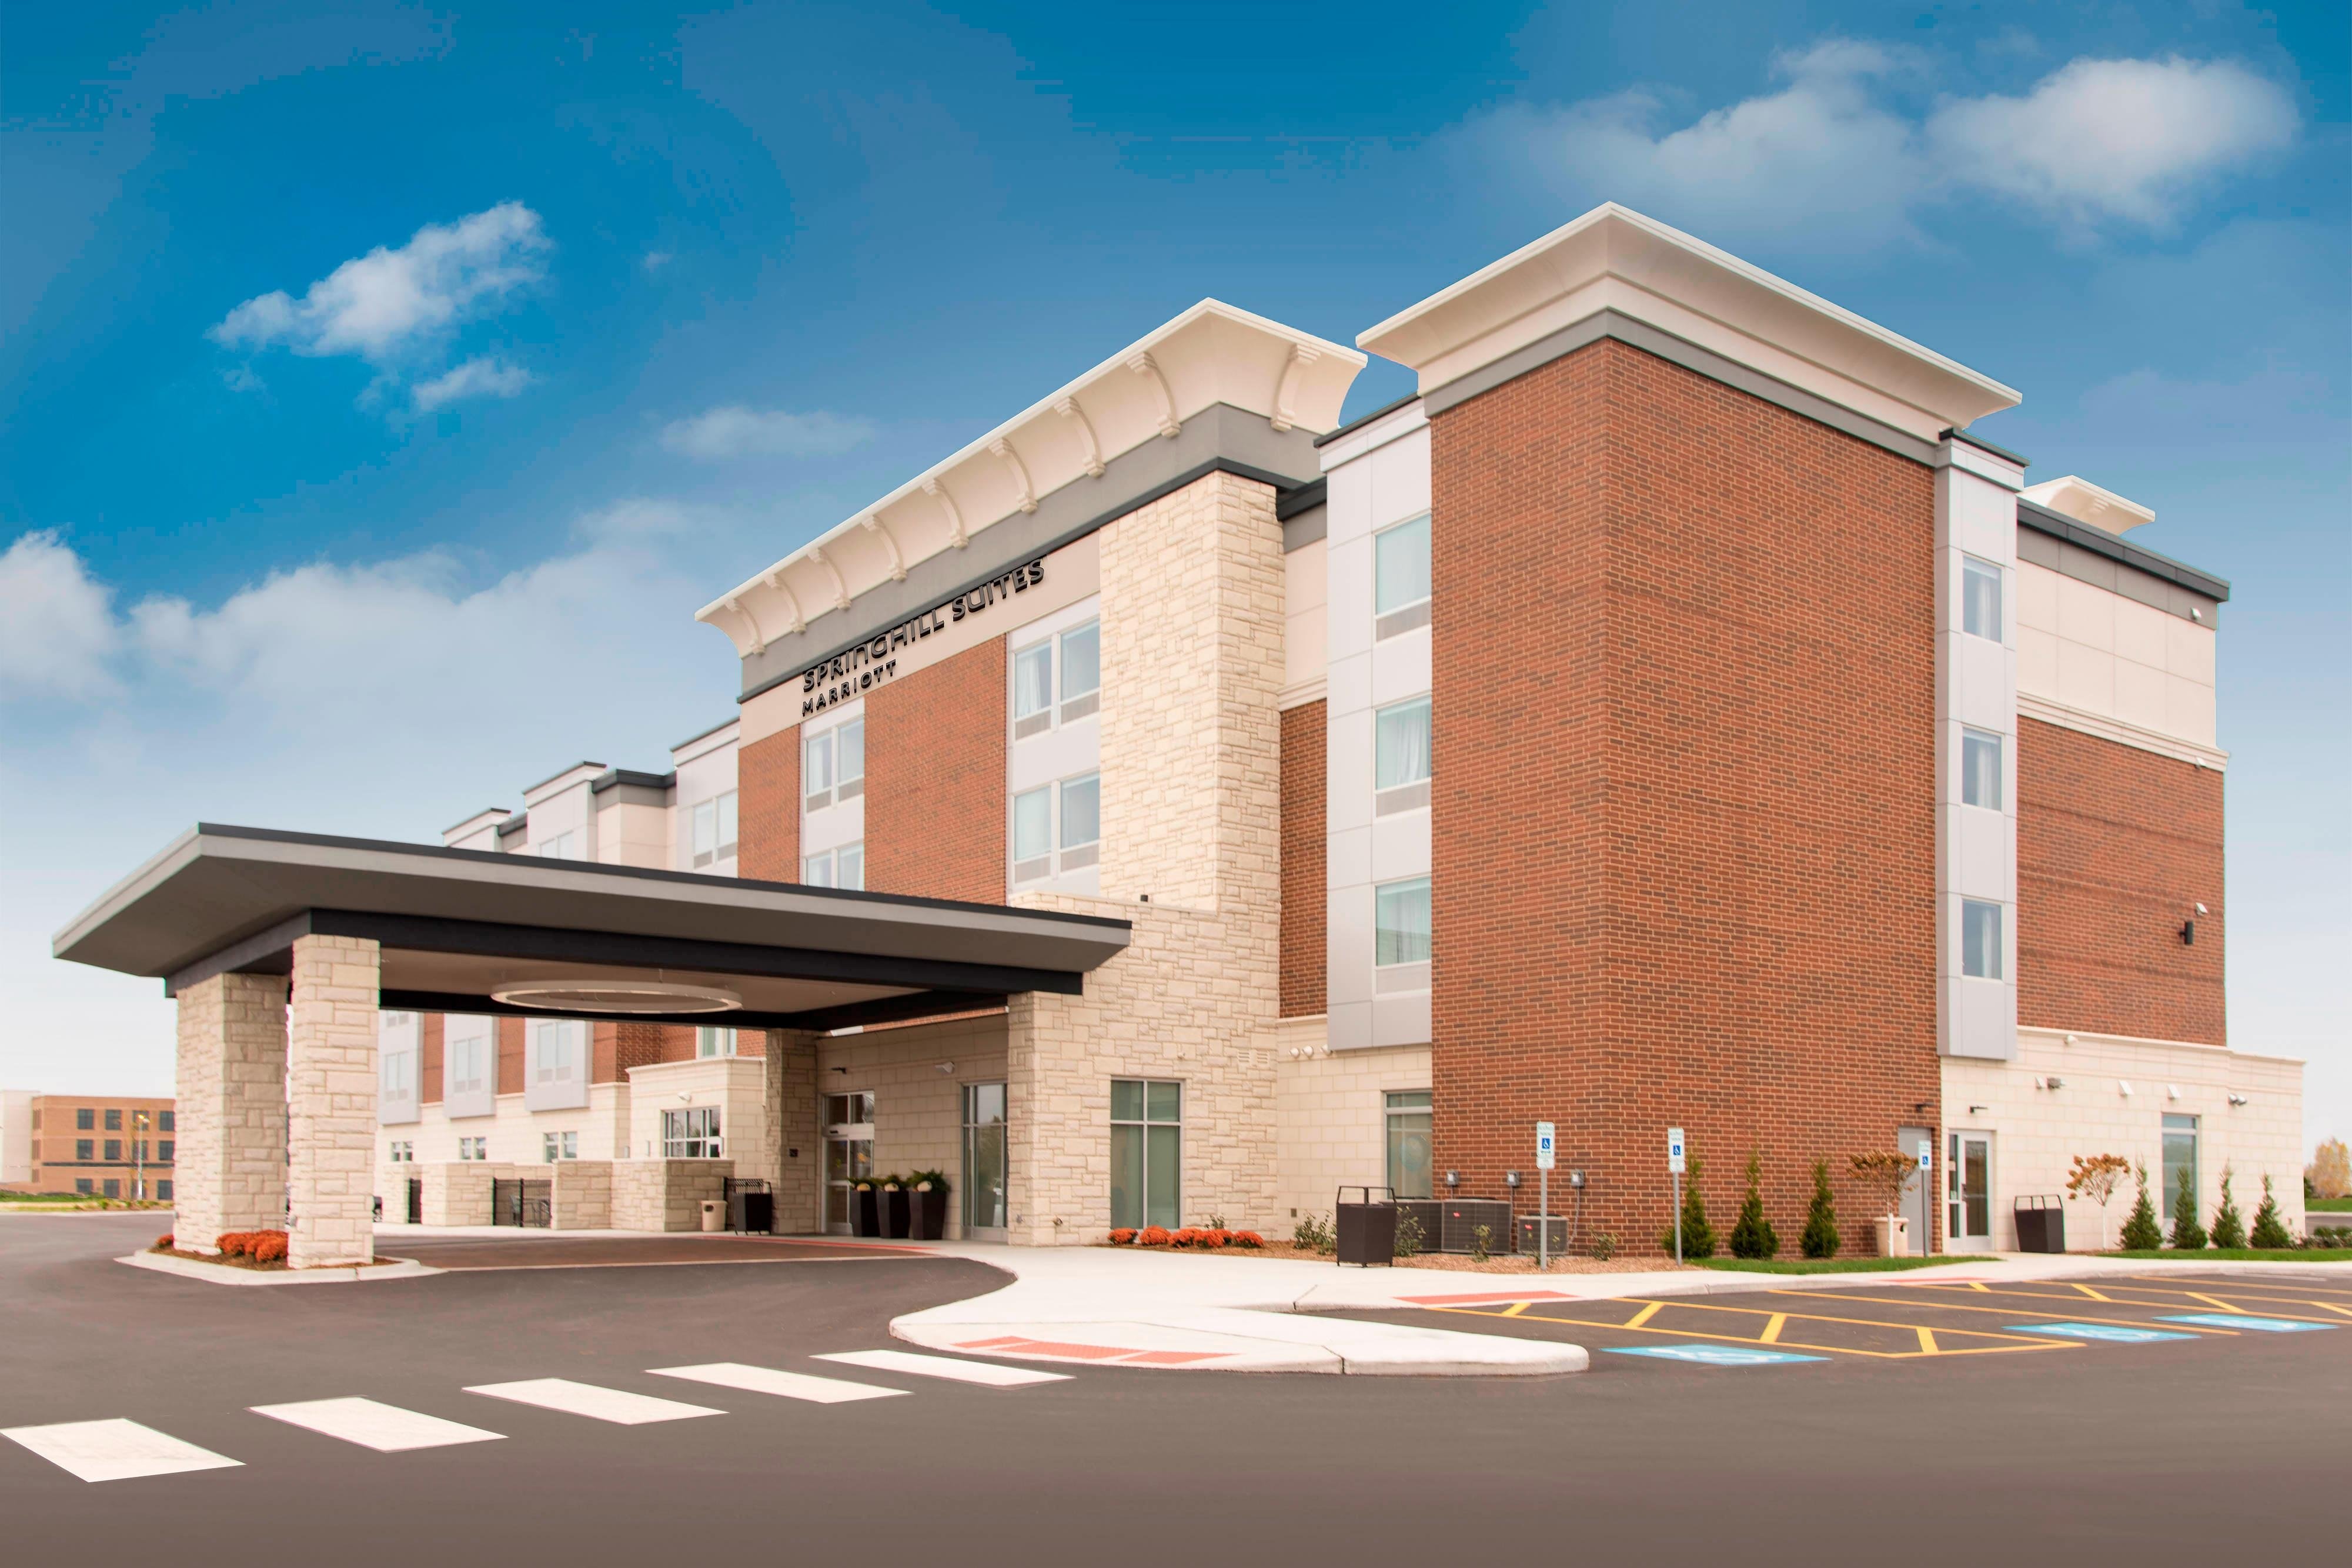 SpringHill Suites by Marriott Chicago Southeast/Munster, IN image